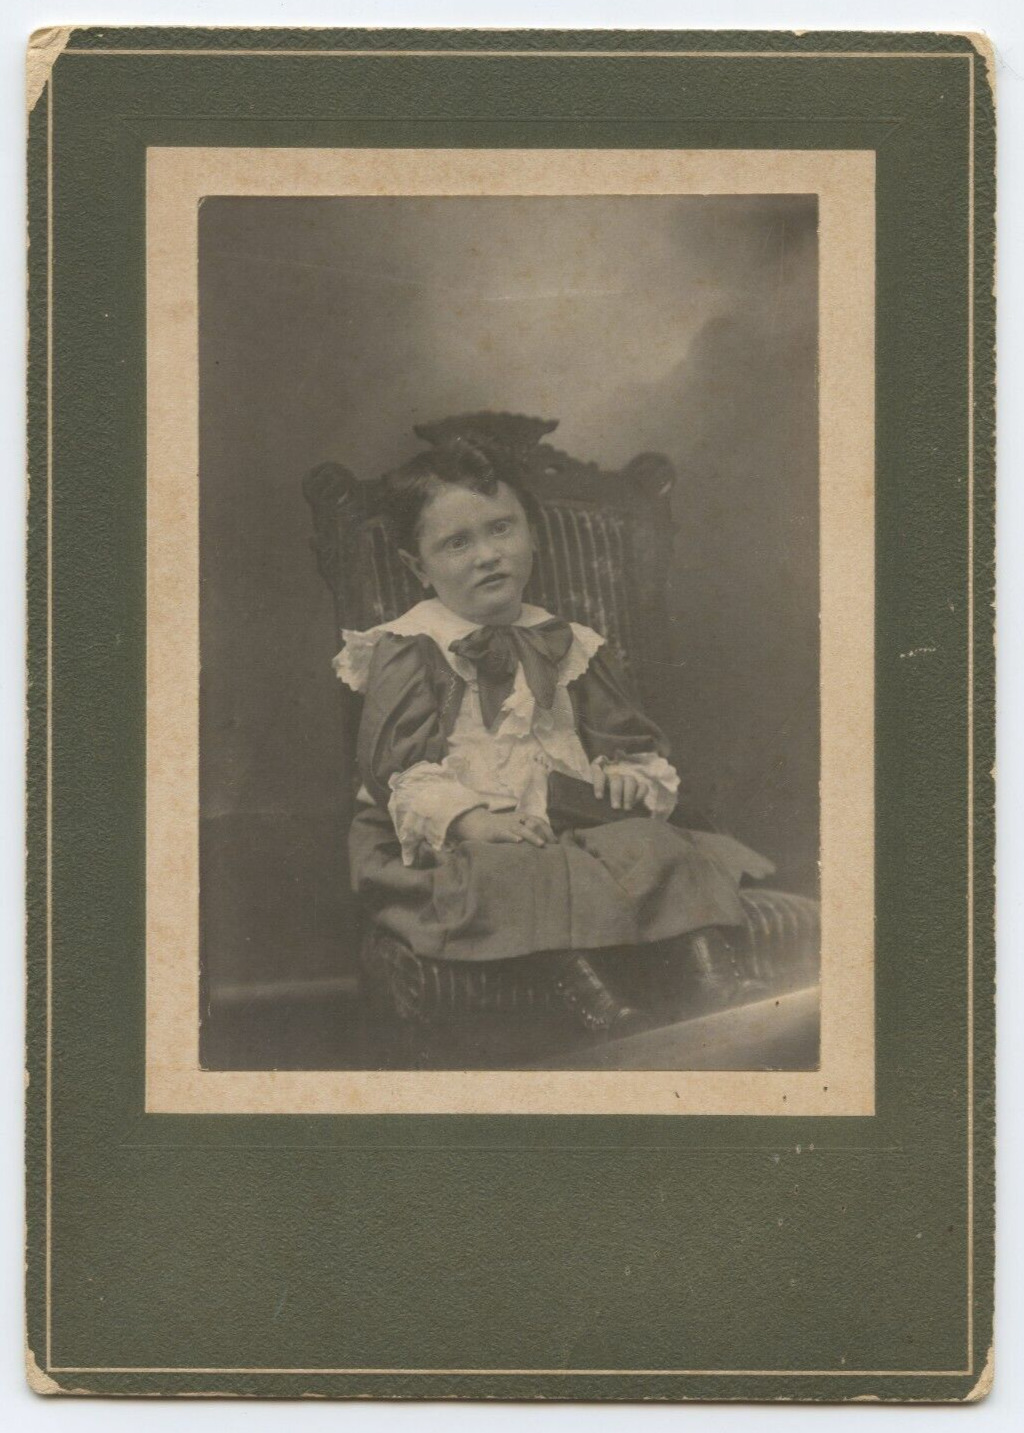 Antique Cabinet Card c. 1900s Portrait of a Toddler by Unknown Photographer